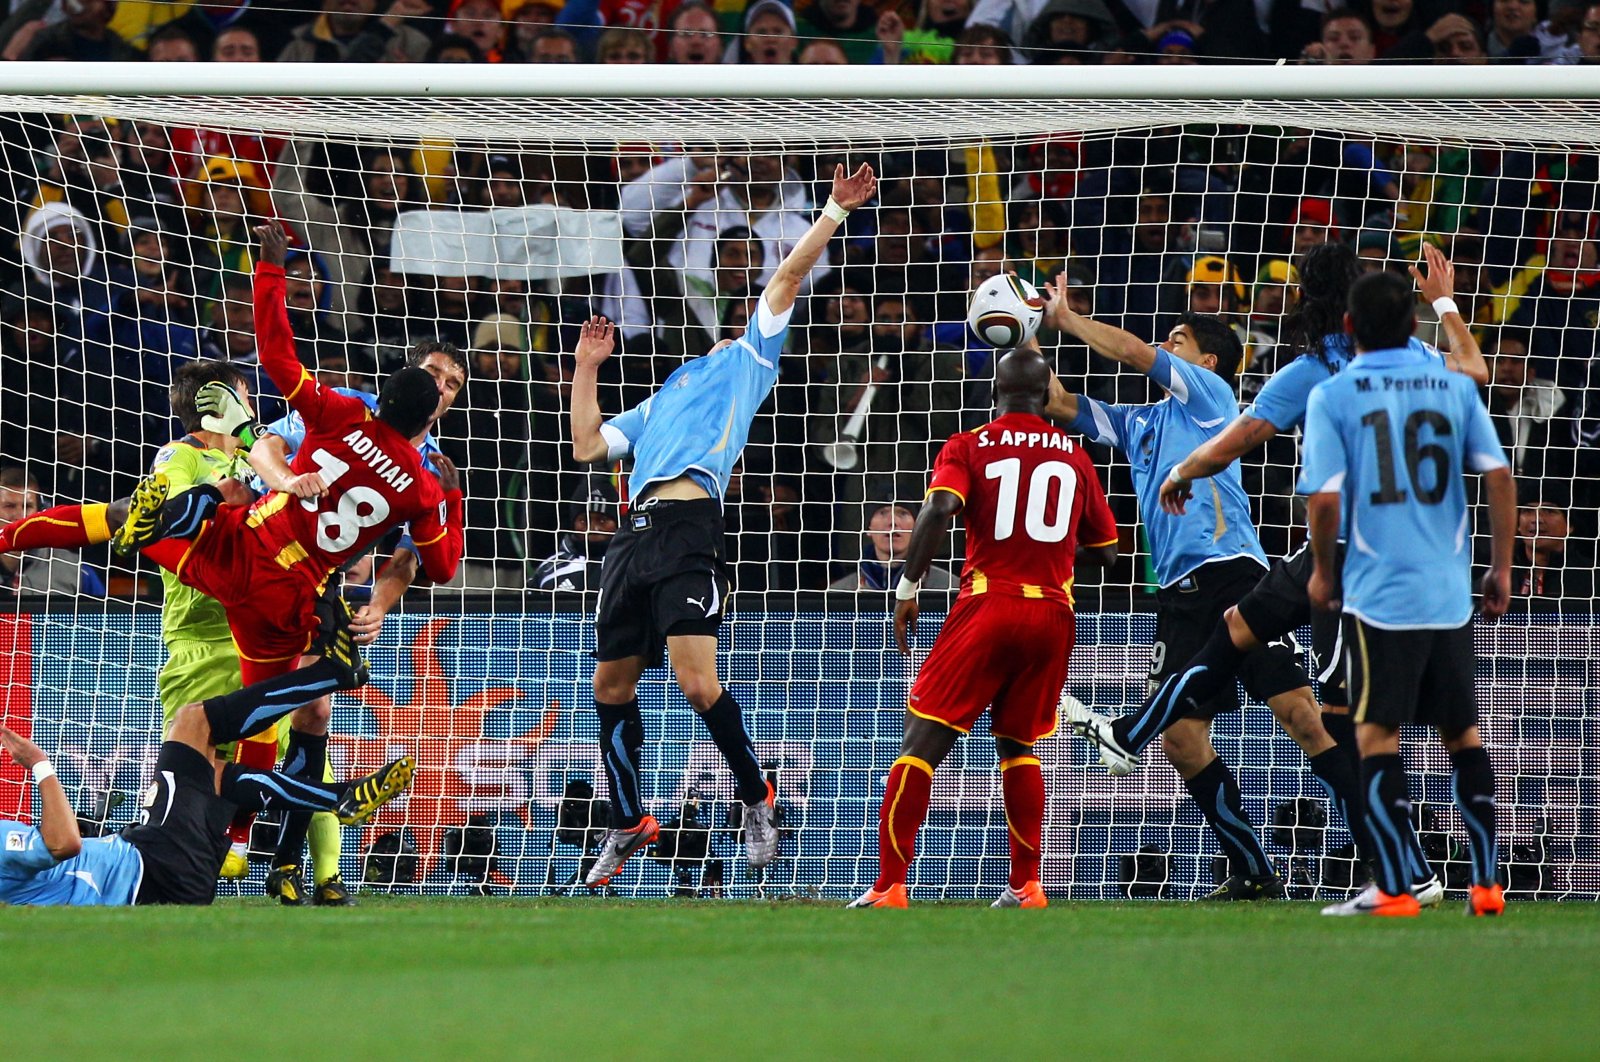 Uruguay&#039;s Luis Suarez handles the ball on the goal line, for which he is sent off, during the 2010 FIFA World Cup South Africa quarterfinal match between Uruguay and Ghana at the Soccer City stadium, Johannesburg, South Africa, July 2, 2010. (Getty Images Photo)